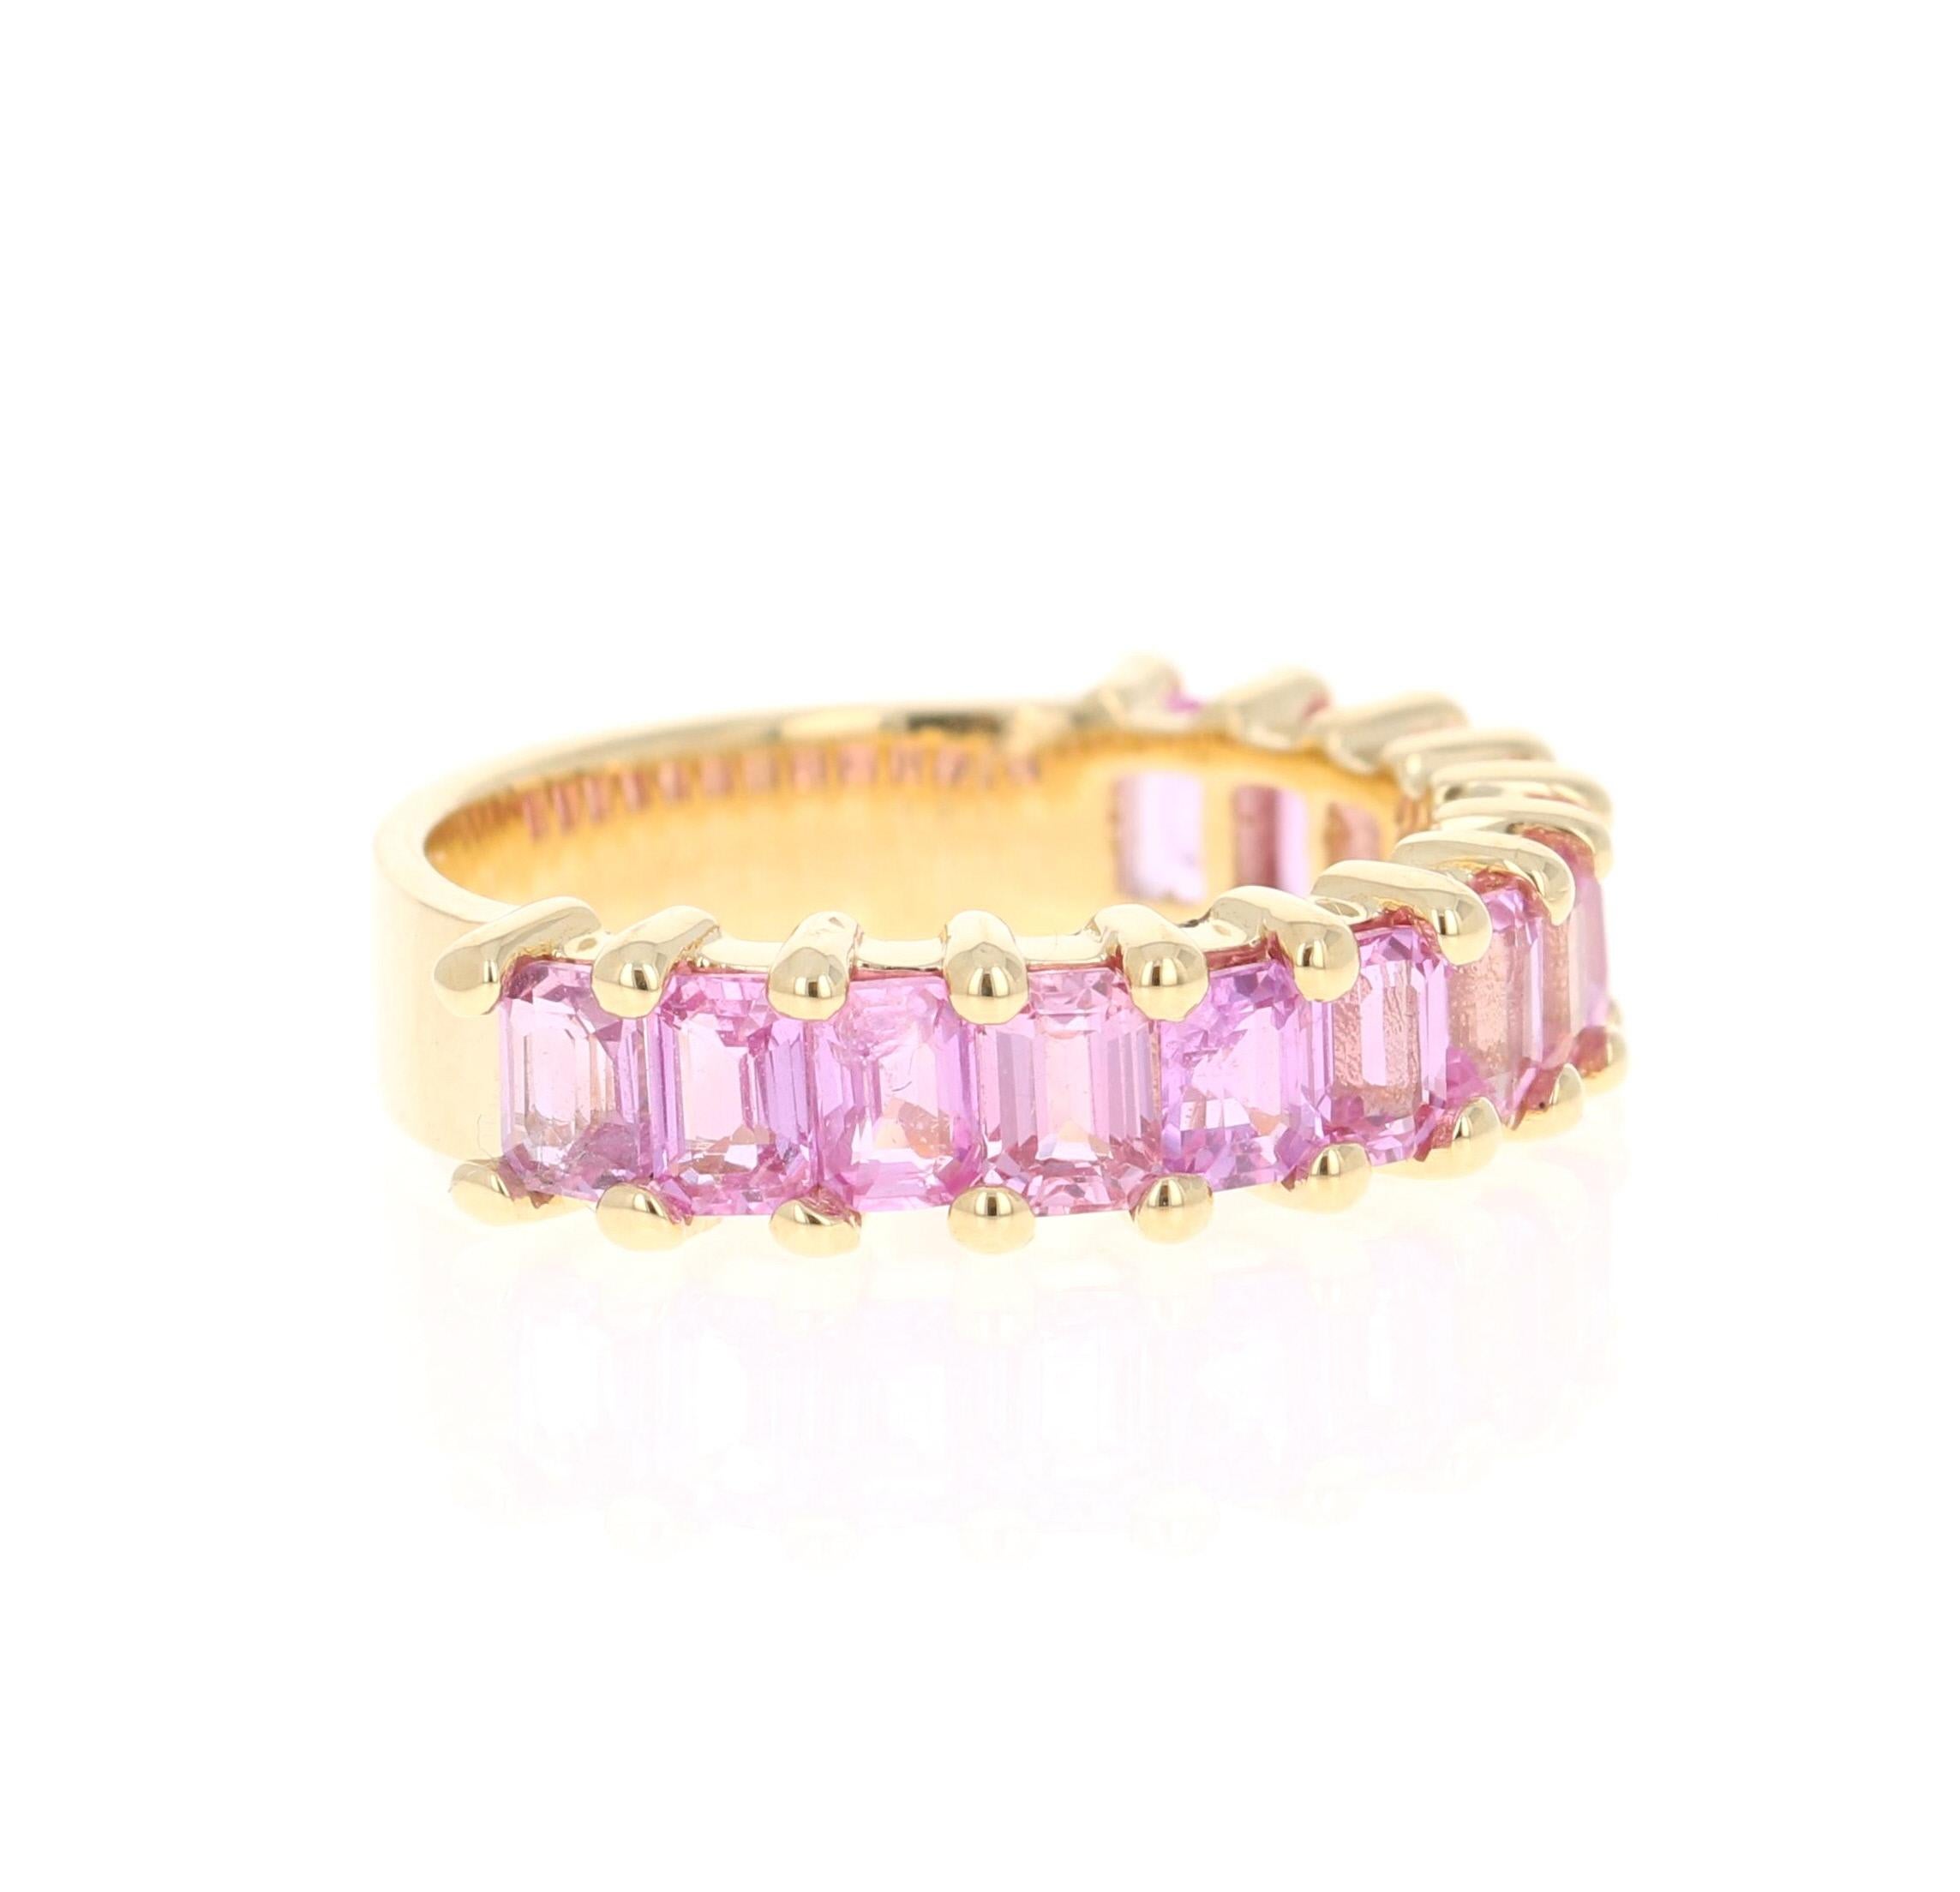 This ring has 13 Emerald Cut Pink Sapphires that weighs 3.45 Carats. 

Crafted in 18 Karat Yellow Gold and weighs approximately 5.0 grams 

The ring is a size 7 and can be re-sized at no additional charge